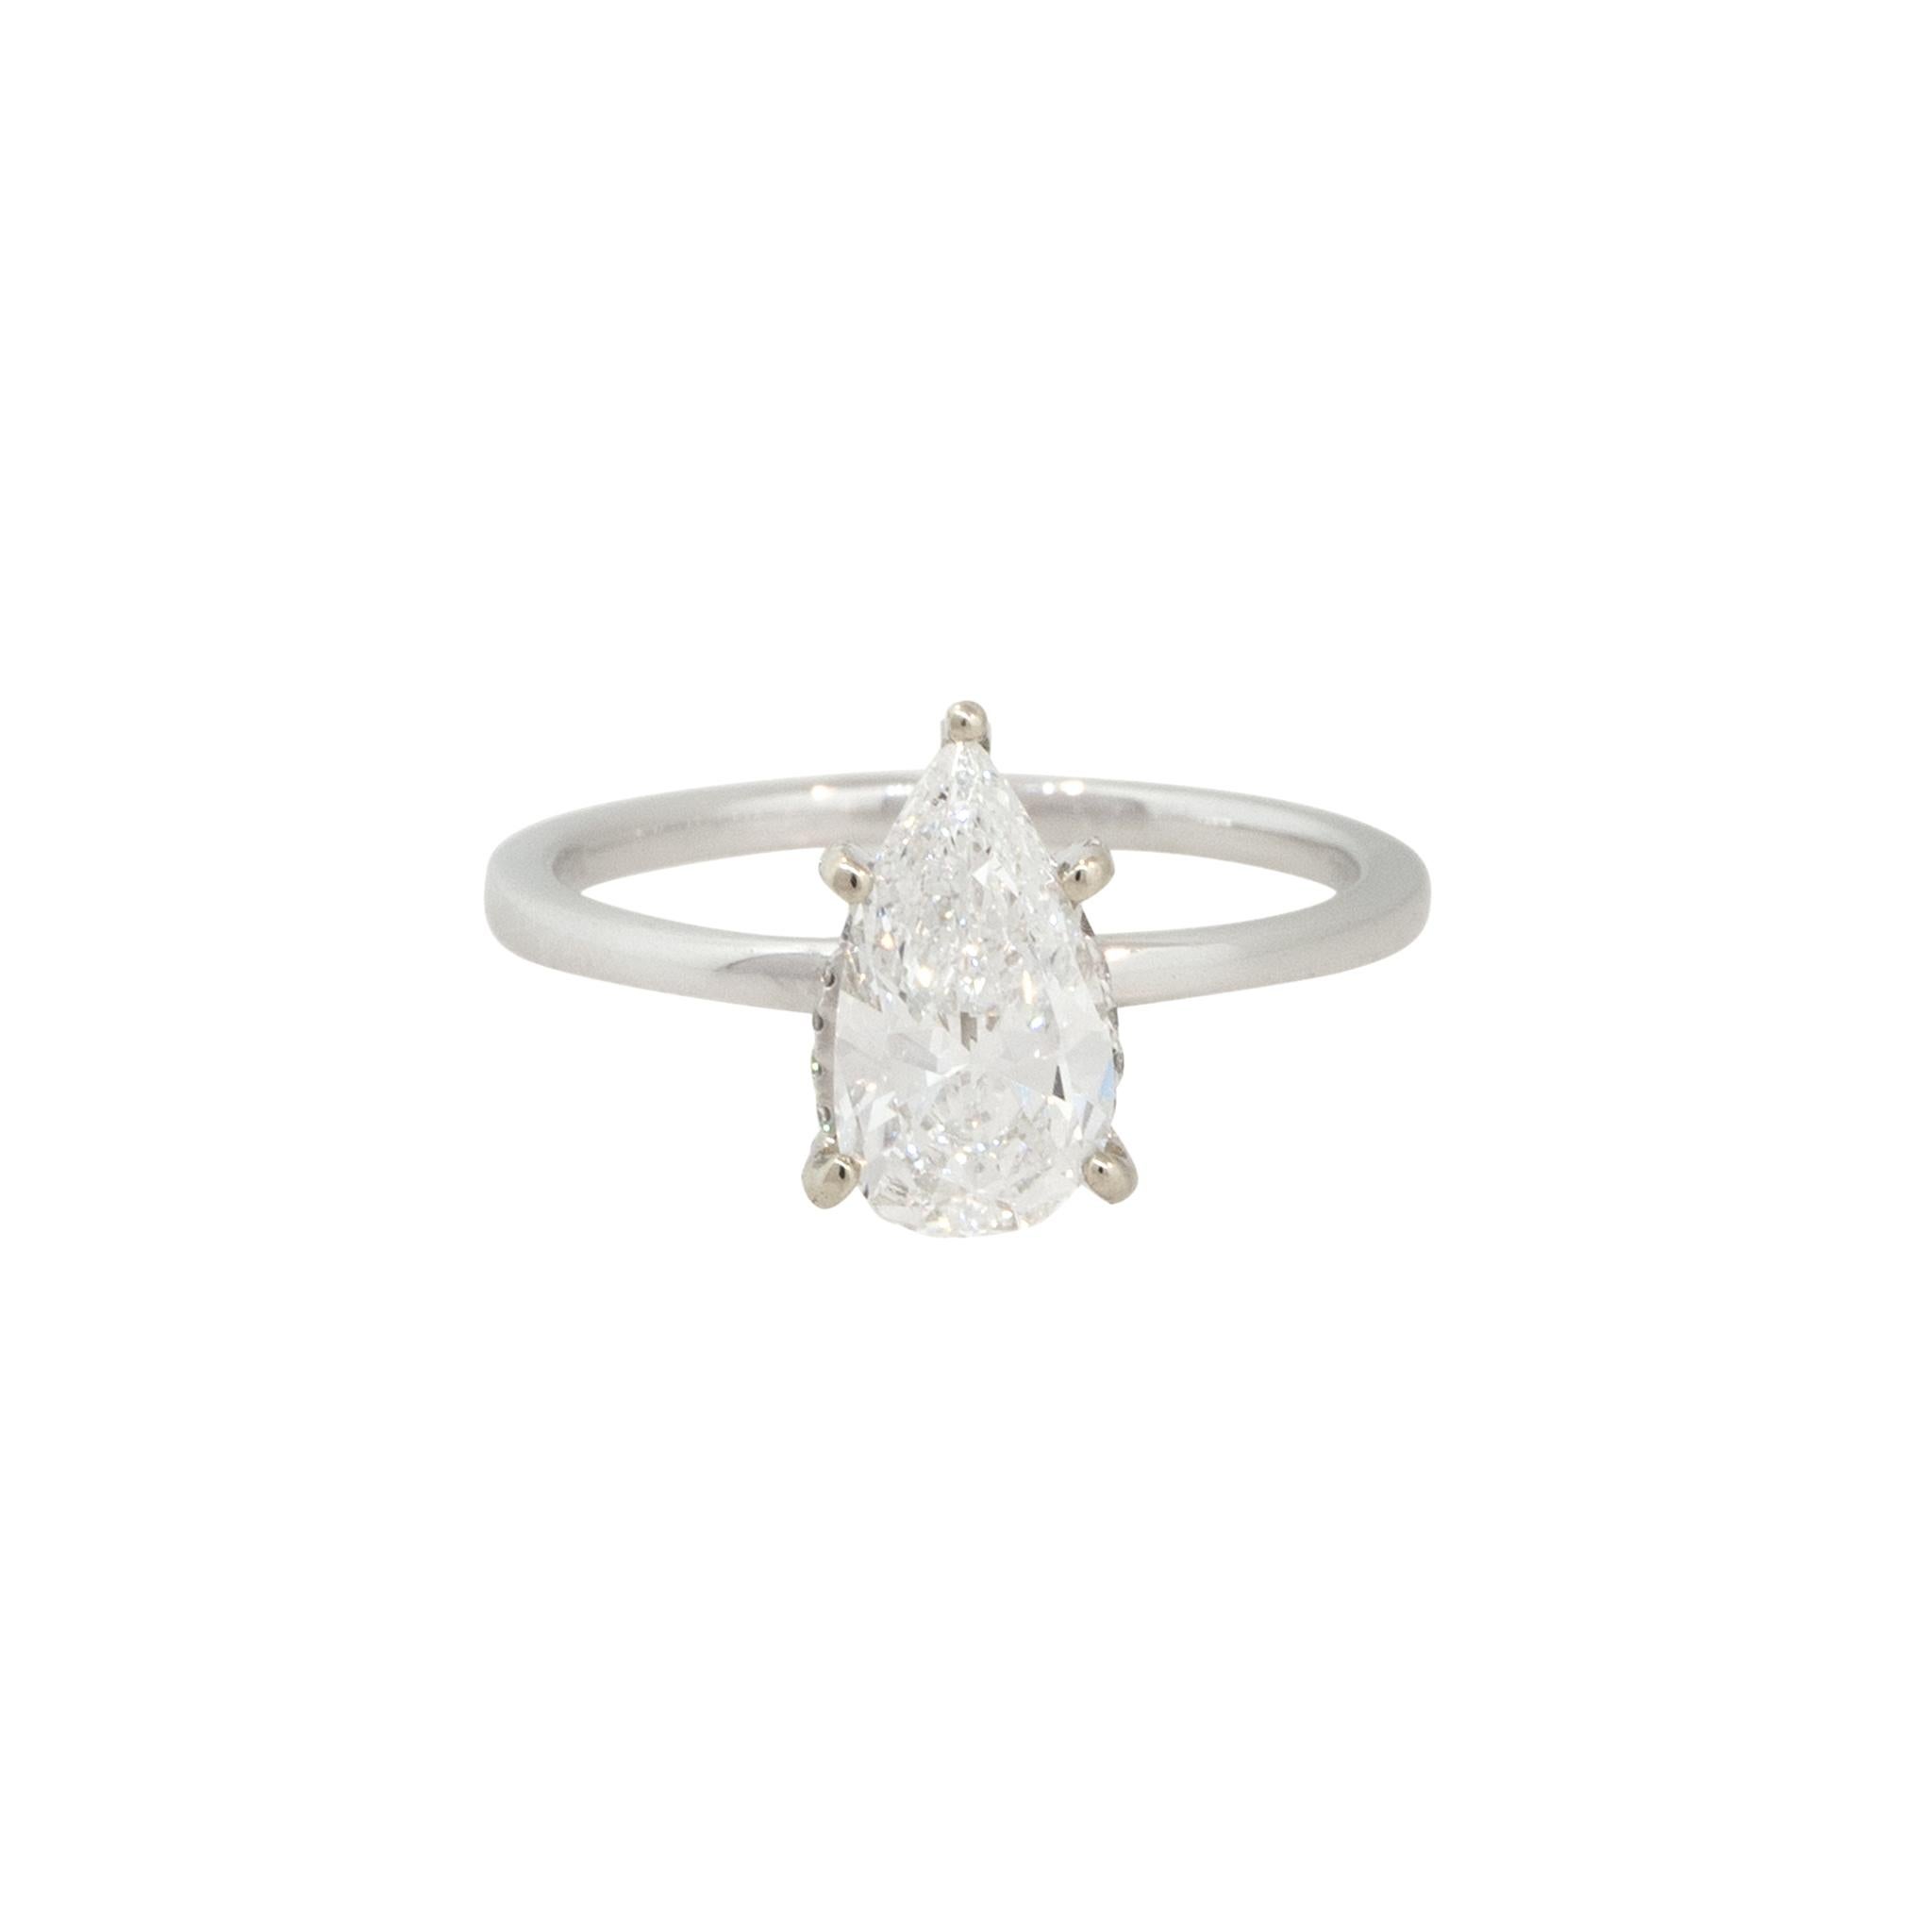 GIA Certified 18k White Gold 1.52ctw Pear Shaped Diamond Engagement Ring

Raymond Lee Jewelers in Boca Raton -- South Florida’s destination for diamonds, fine jewelry, antique jewelry, estate pieces, and vintage jewels.

Style: Women's 5 Prong